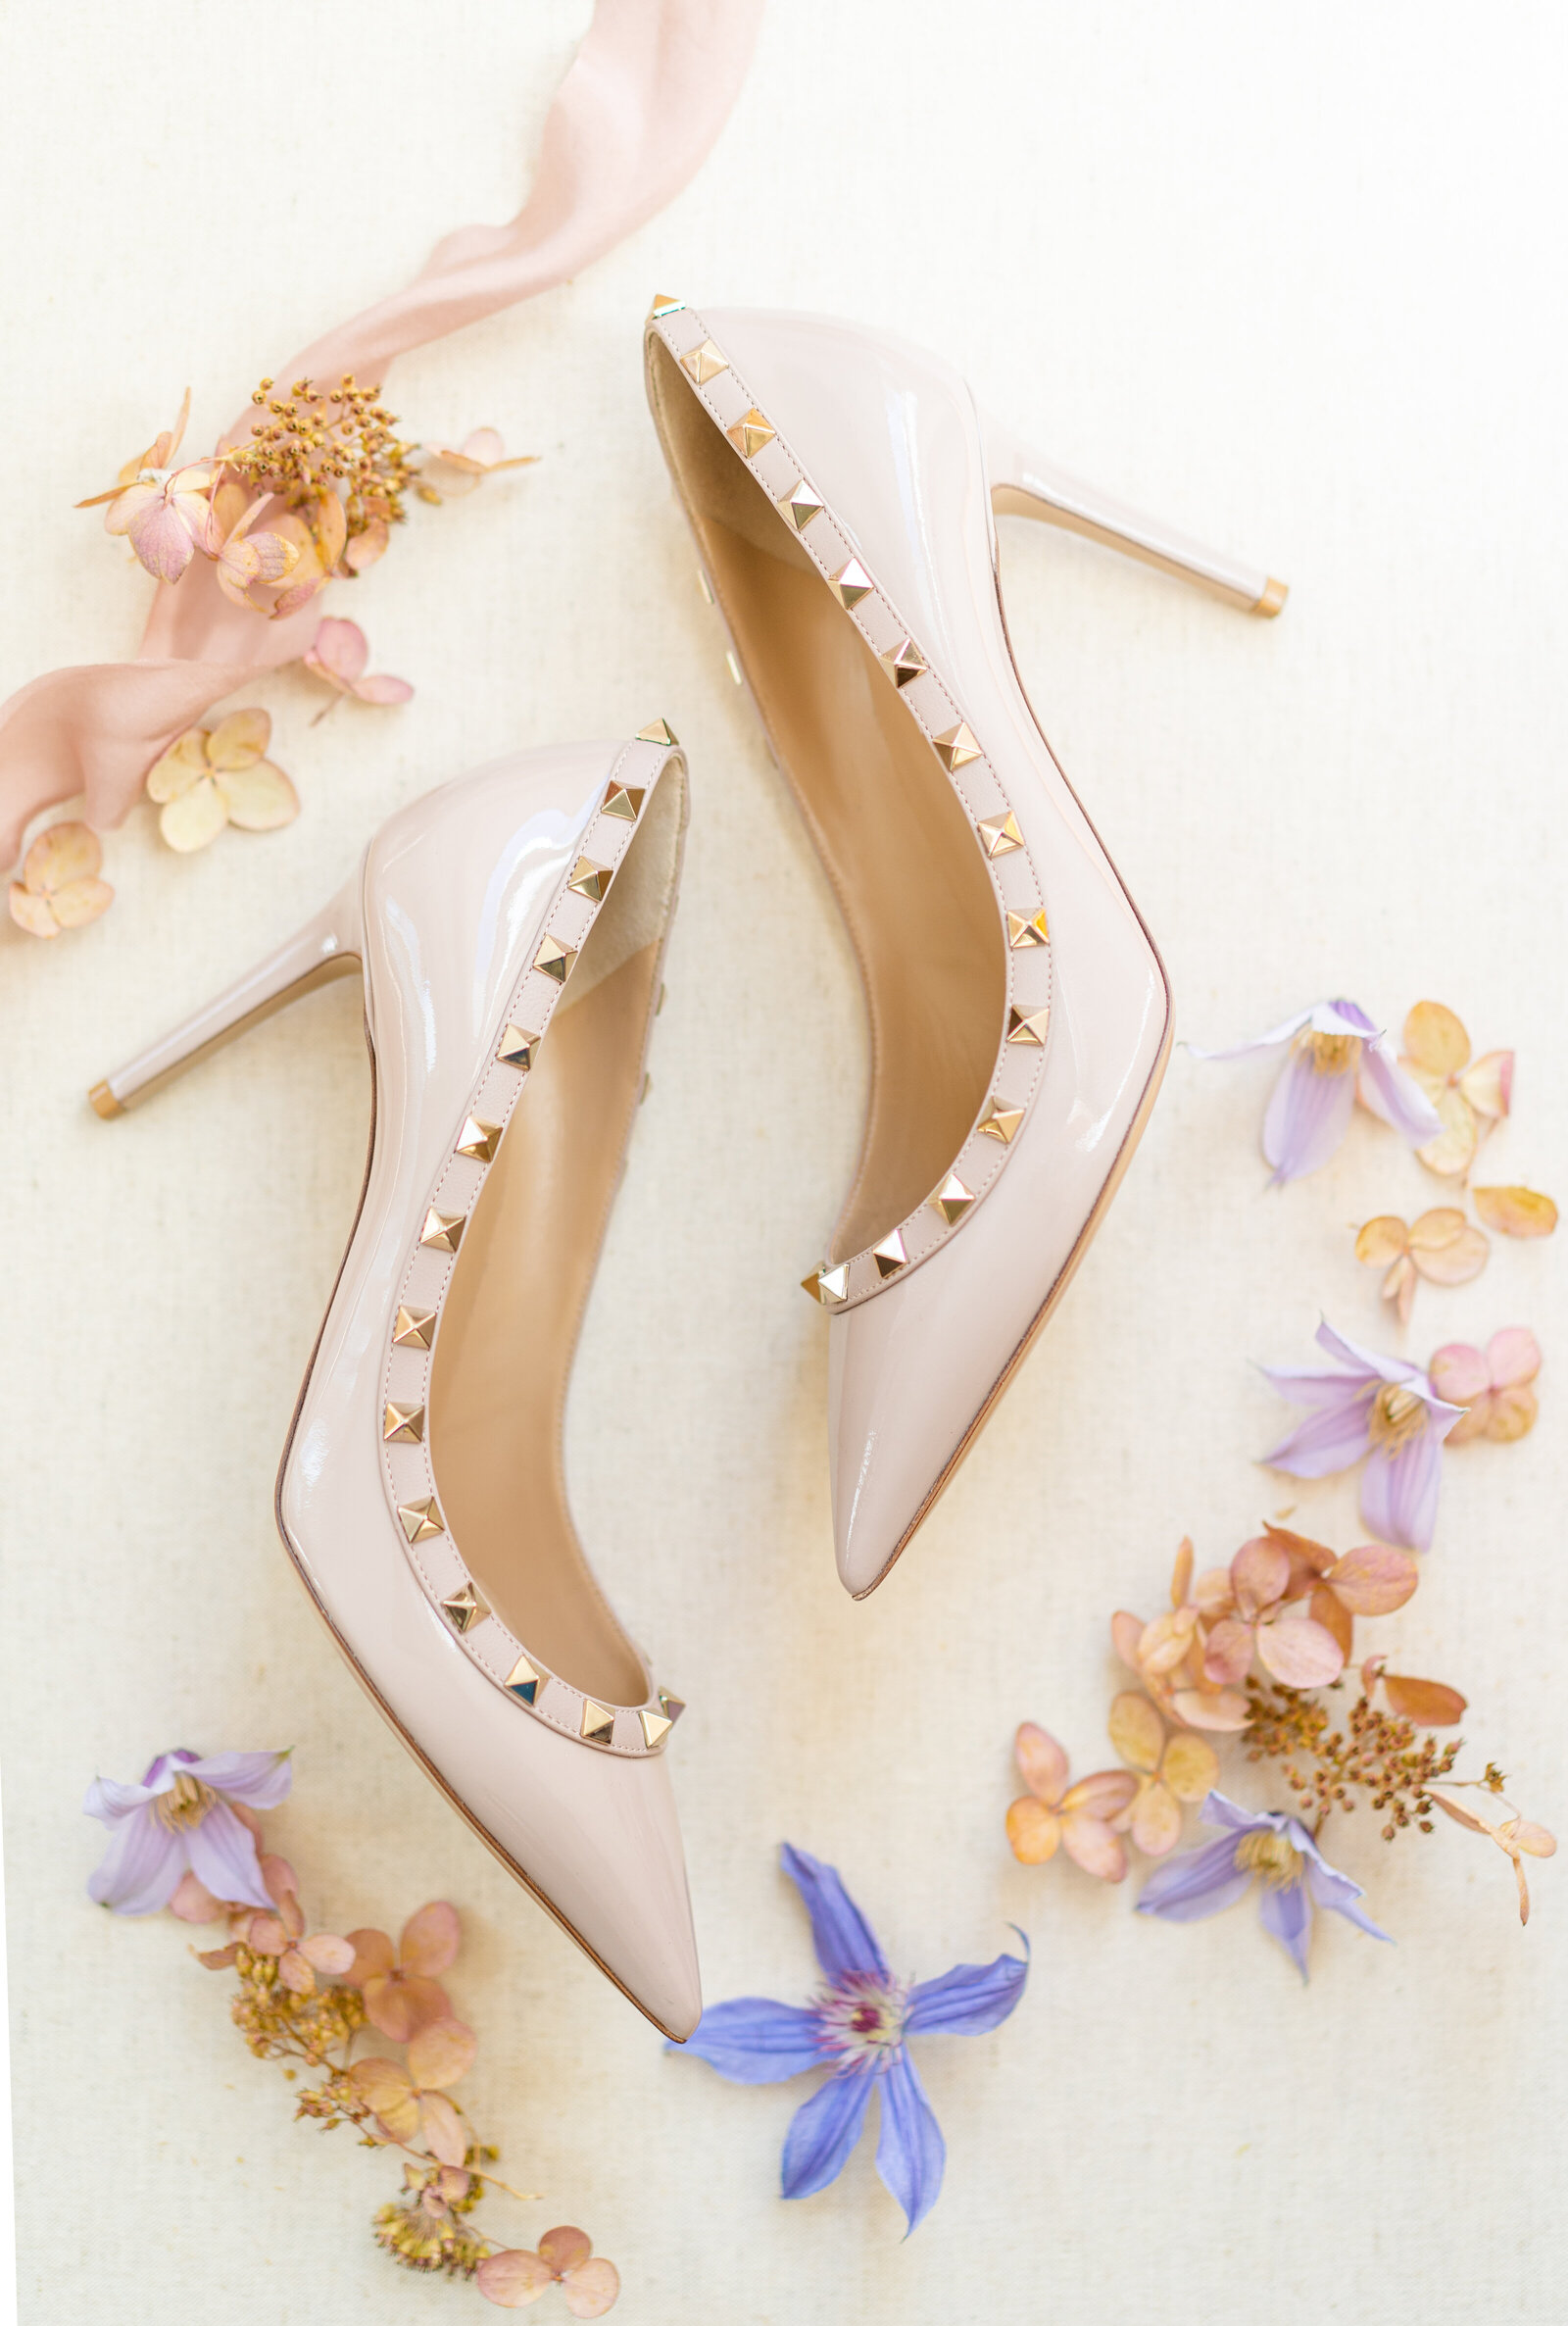 Cream heels set with lavender and peach-colored flowers.